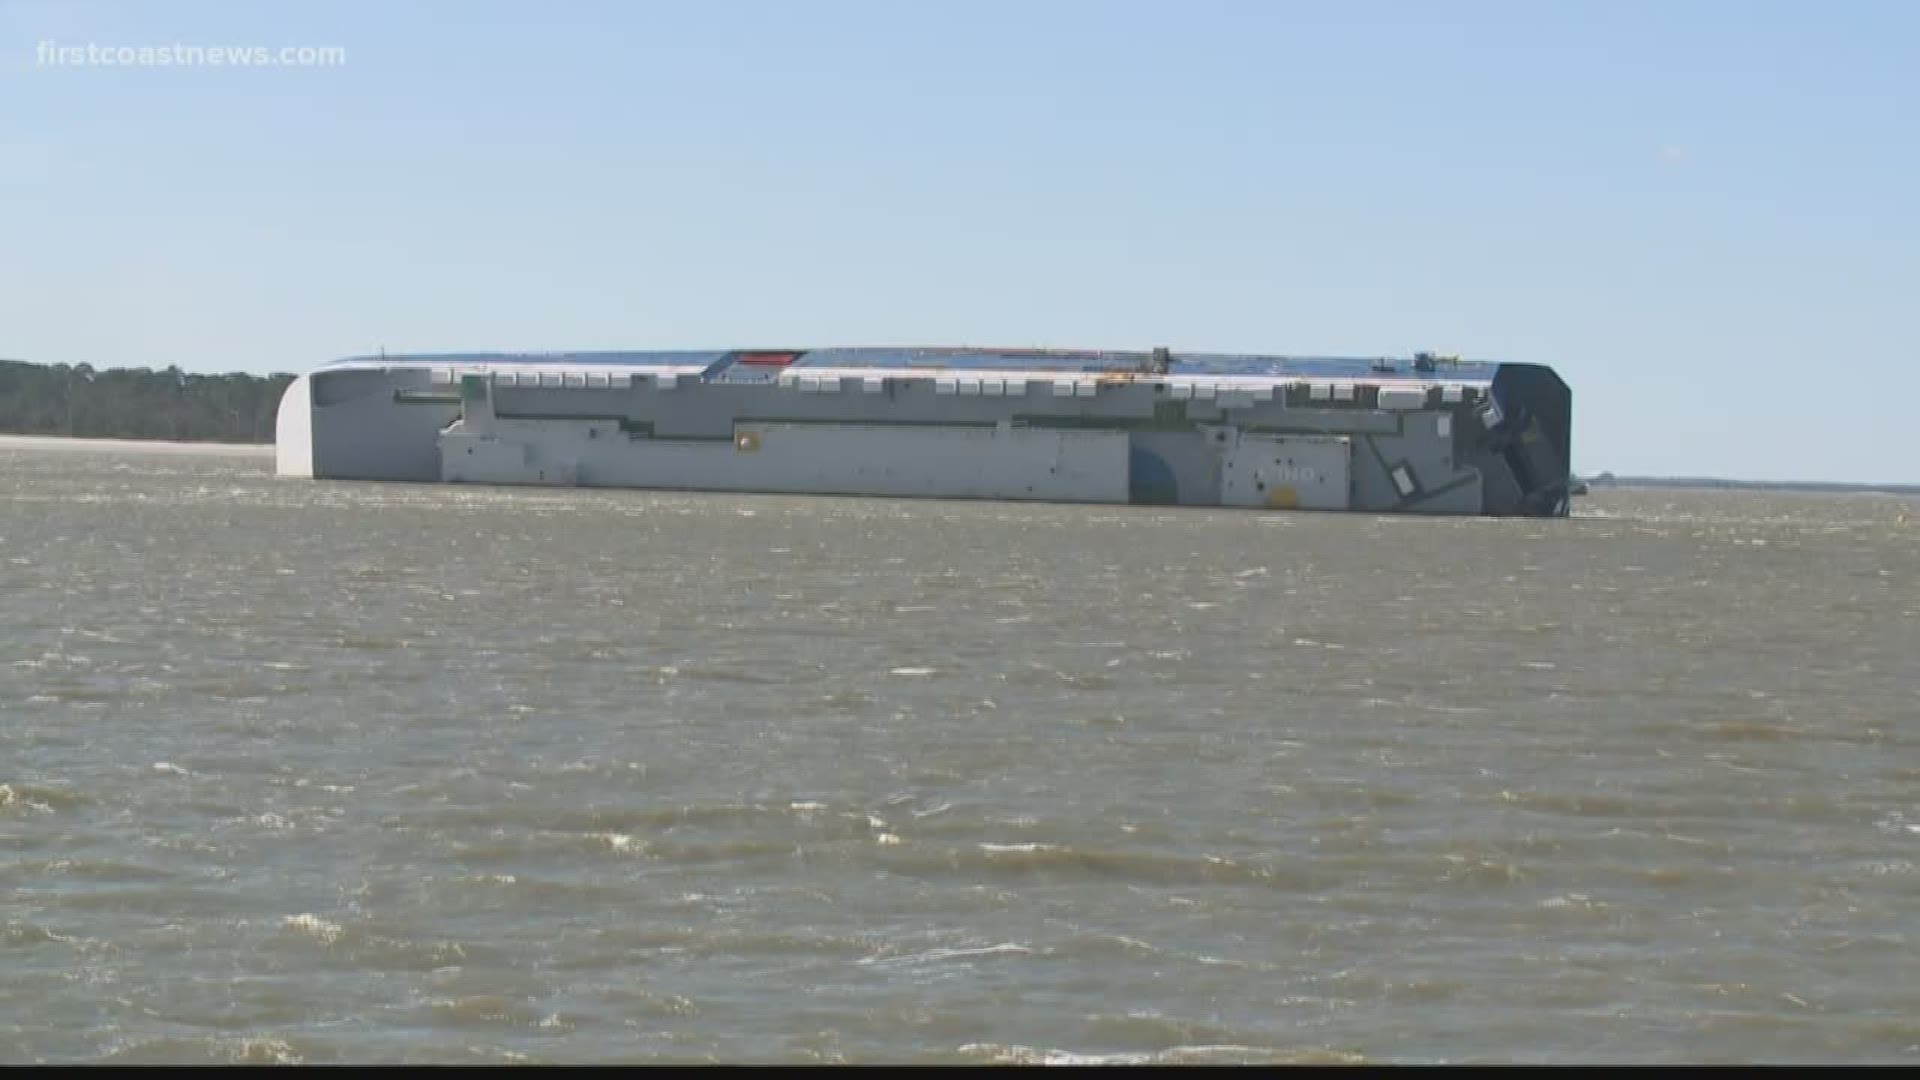 In September, the cargo ship carrying 4,000 cars and dozens of crew members capsized in Georgia's St. Simons Sound.